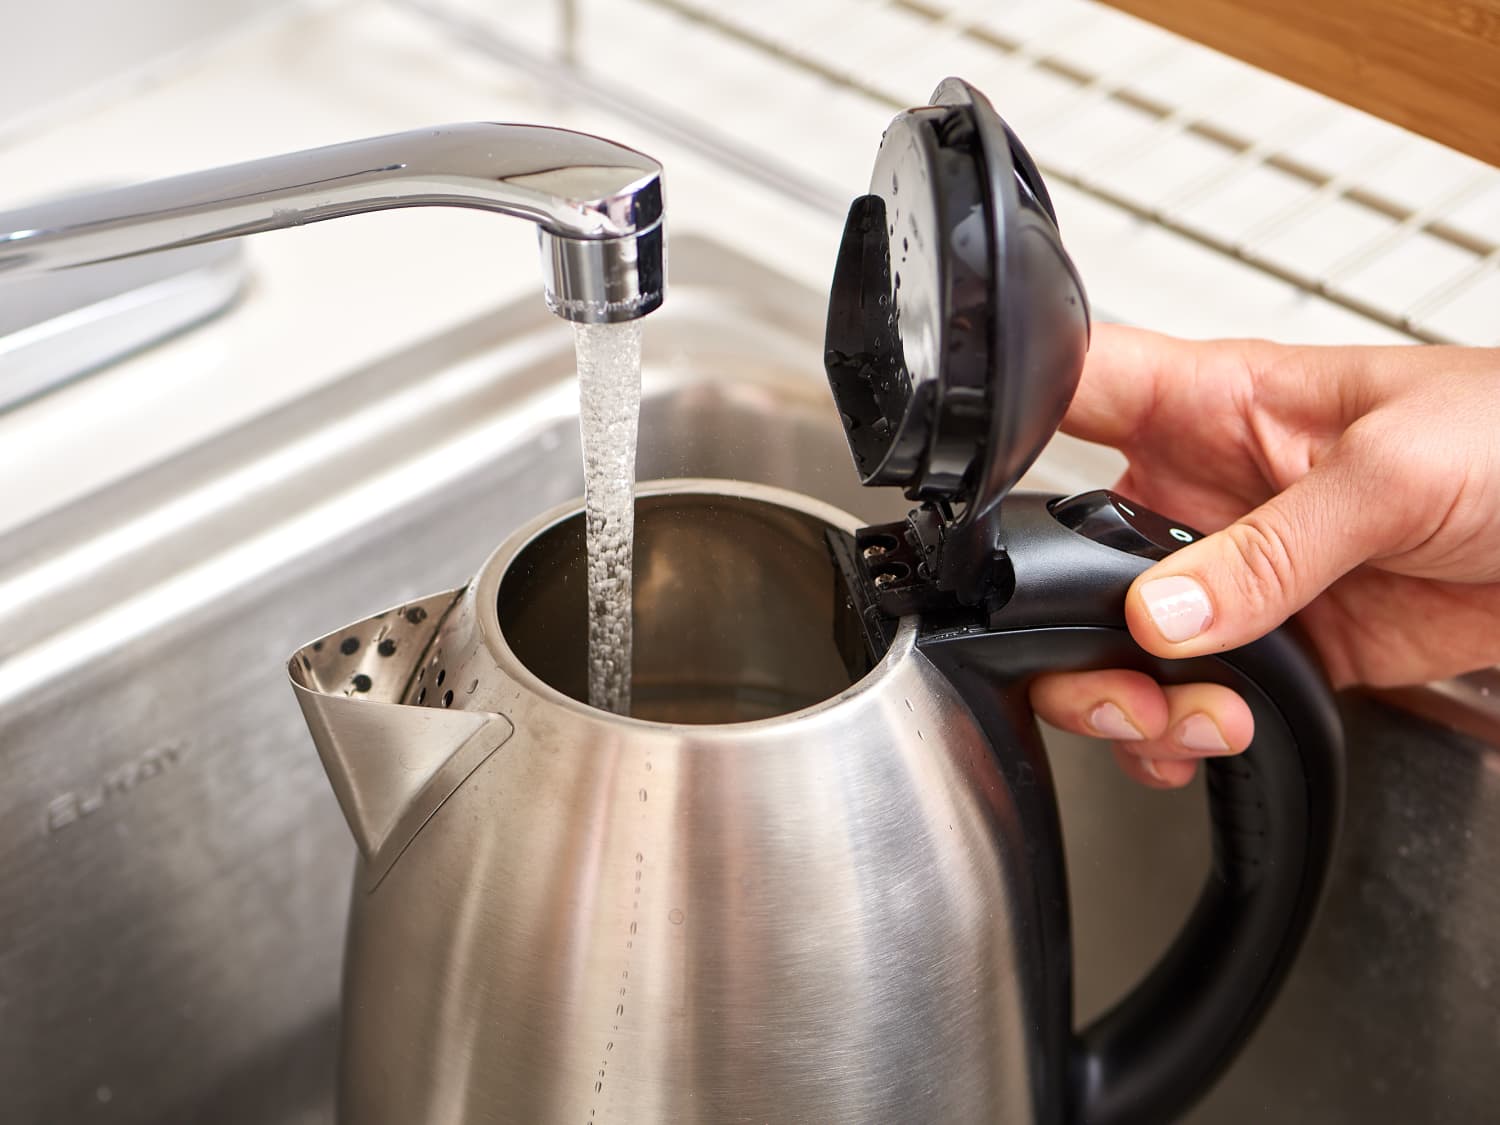 The 4 Best Electric Kettles of 2024